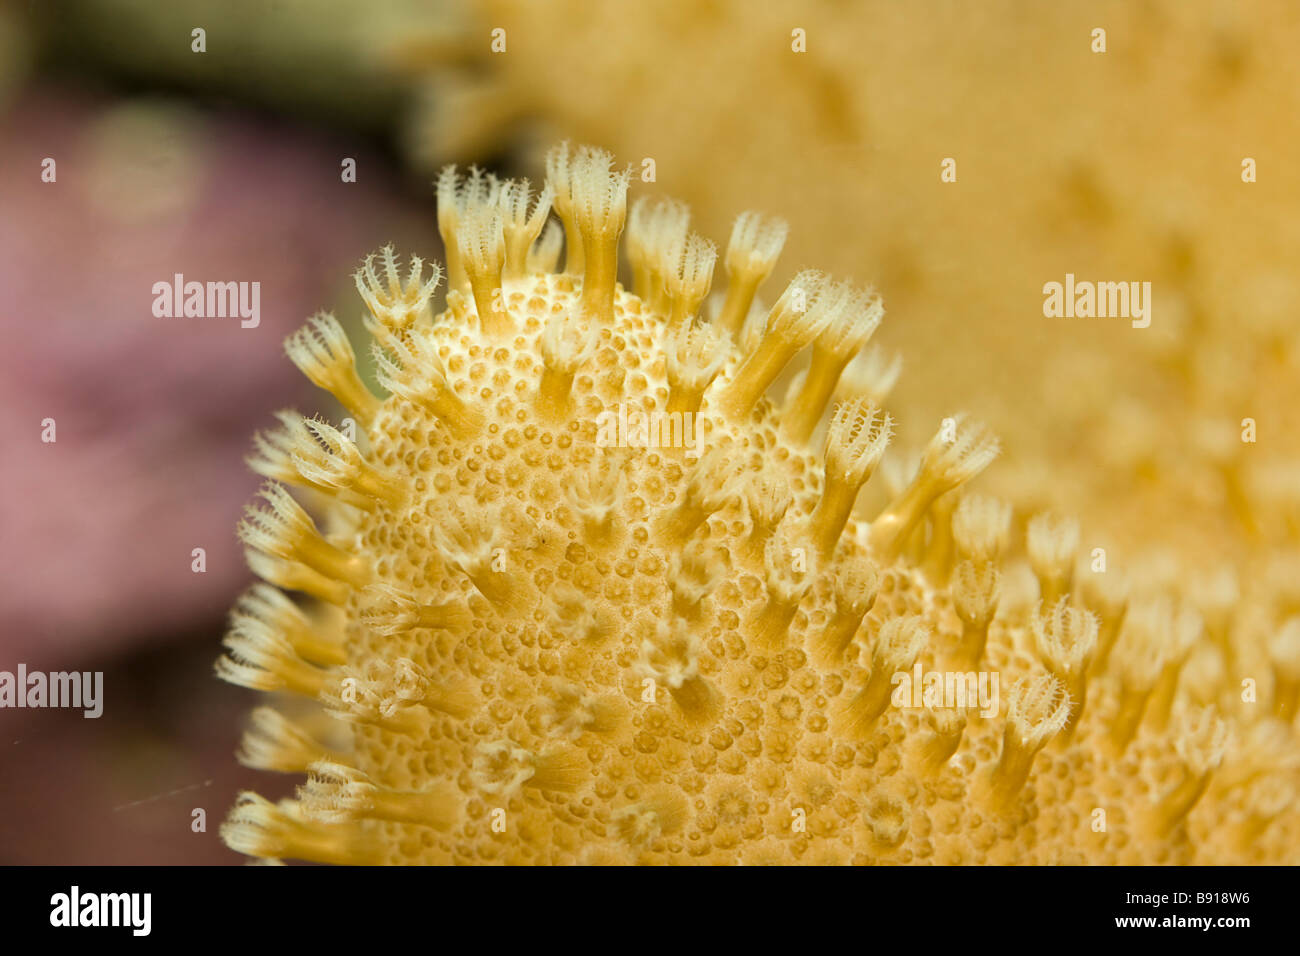 Close-up of polyps on finger leather coral sinularia Stock Photo